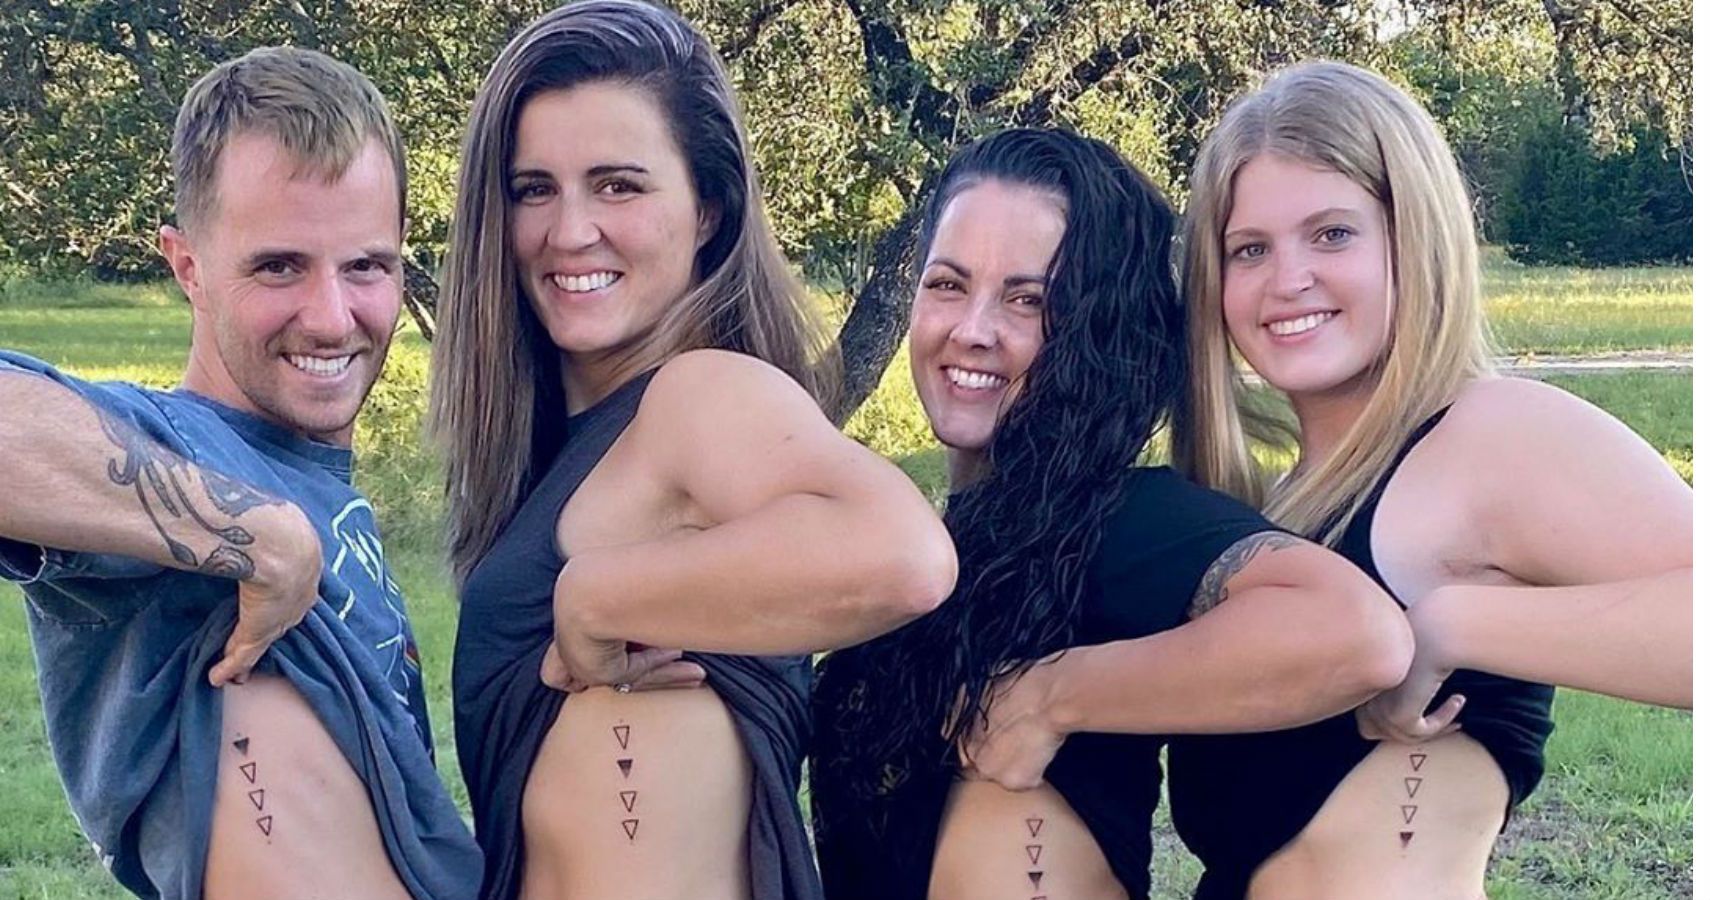 amy challans recommends mother and sibling tattoos pic